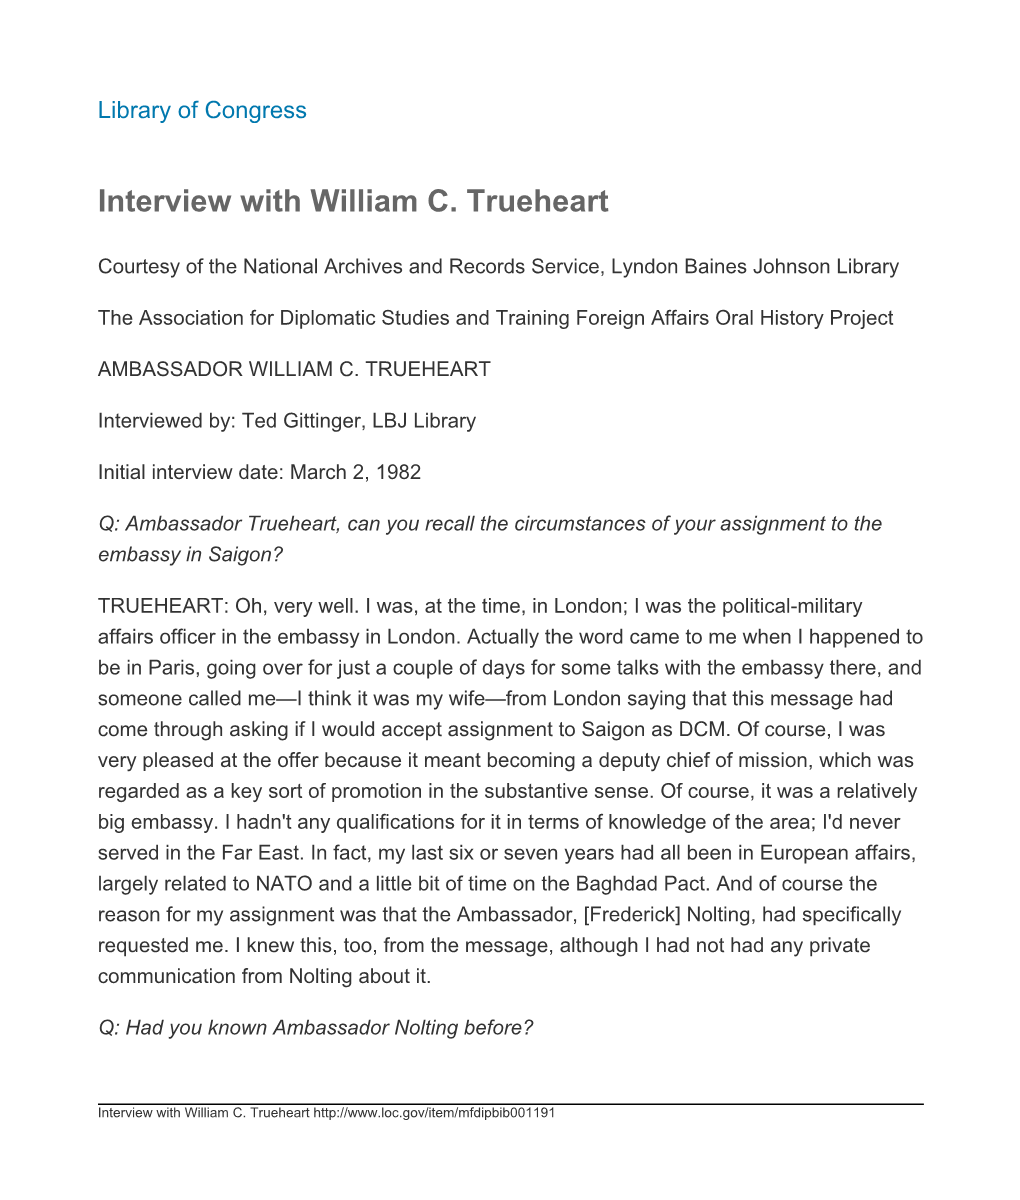 Interview with William C. Trueheart